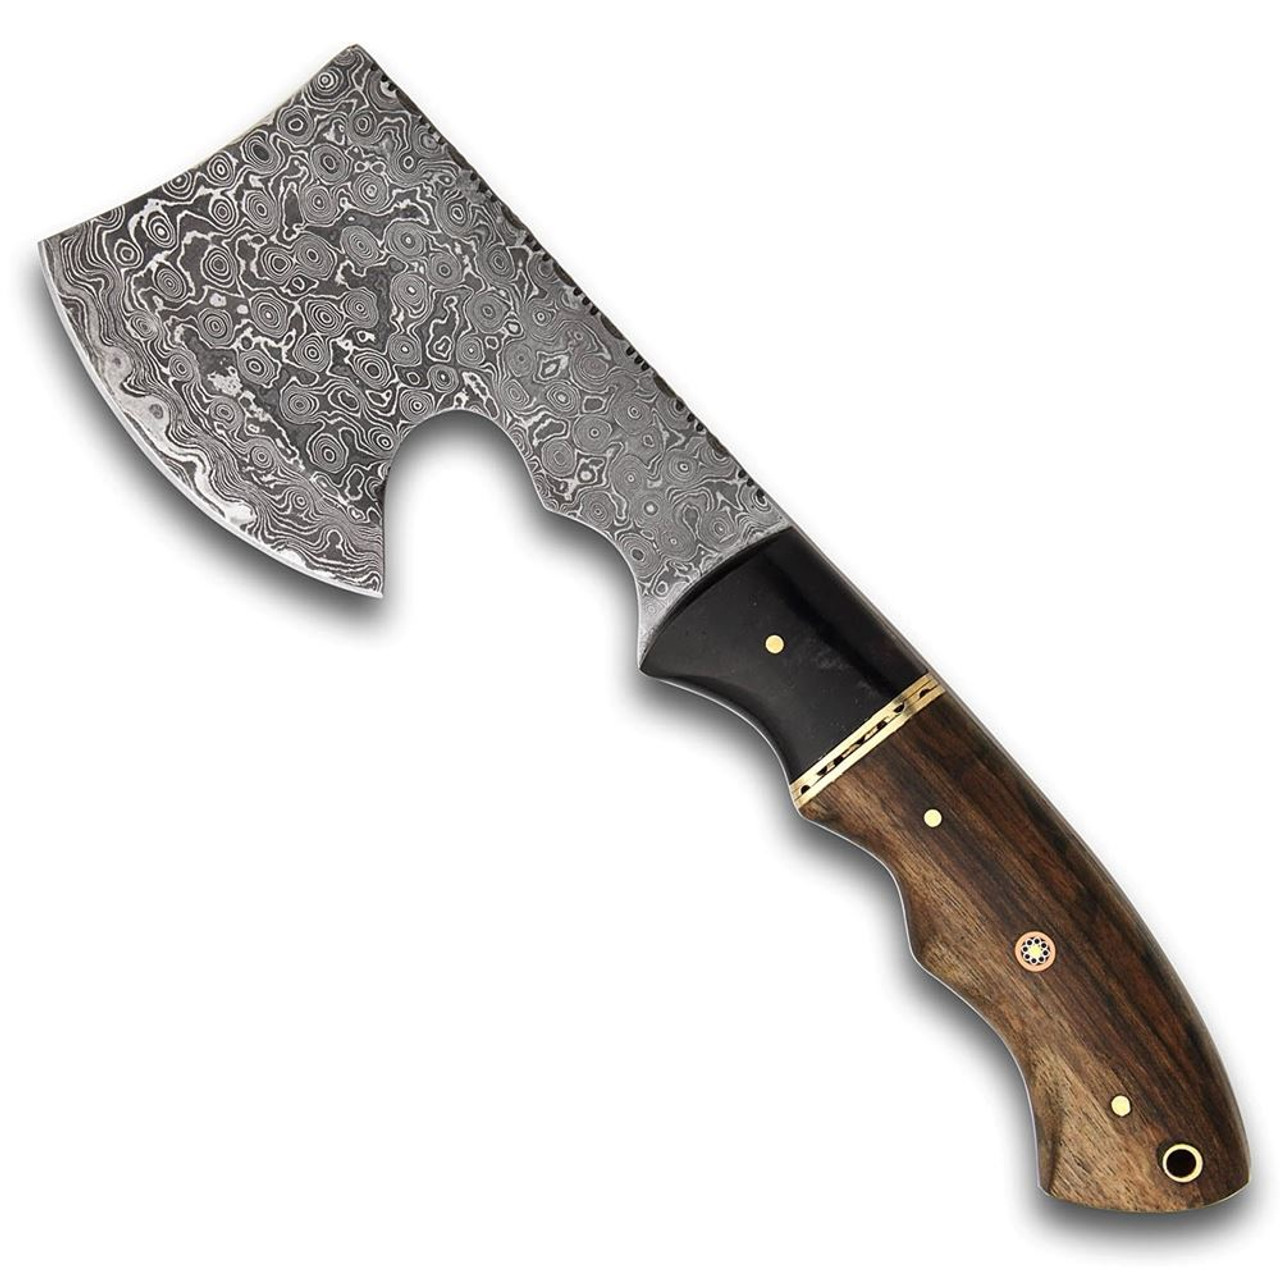  Forged Leather Round Knife. Forged Small Head Round Knife.  Skinning knife. : Tools & Home Improvement